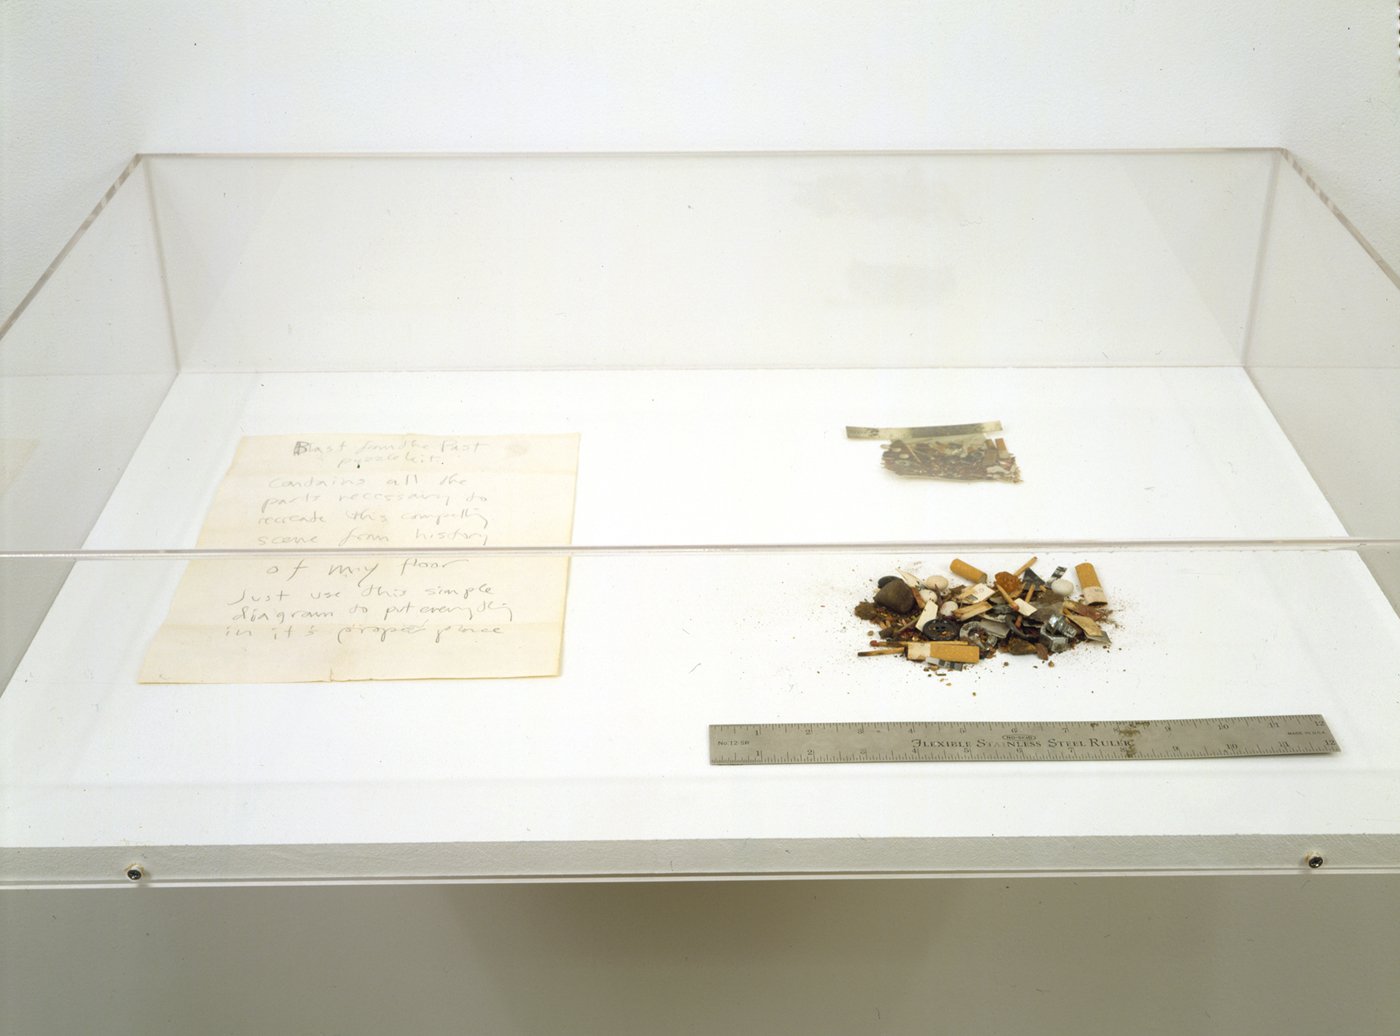  Gordon Matta-Clark,  Blast from the Past , 1970–1972, chromogenic print, 12 inch steel ruler, pencil on paper and floor sweepings, dimensions vary with installation. Courtesty of the Estate of Gordon Matta-Clark and David Zwirner, New York. 